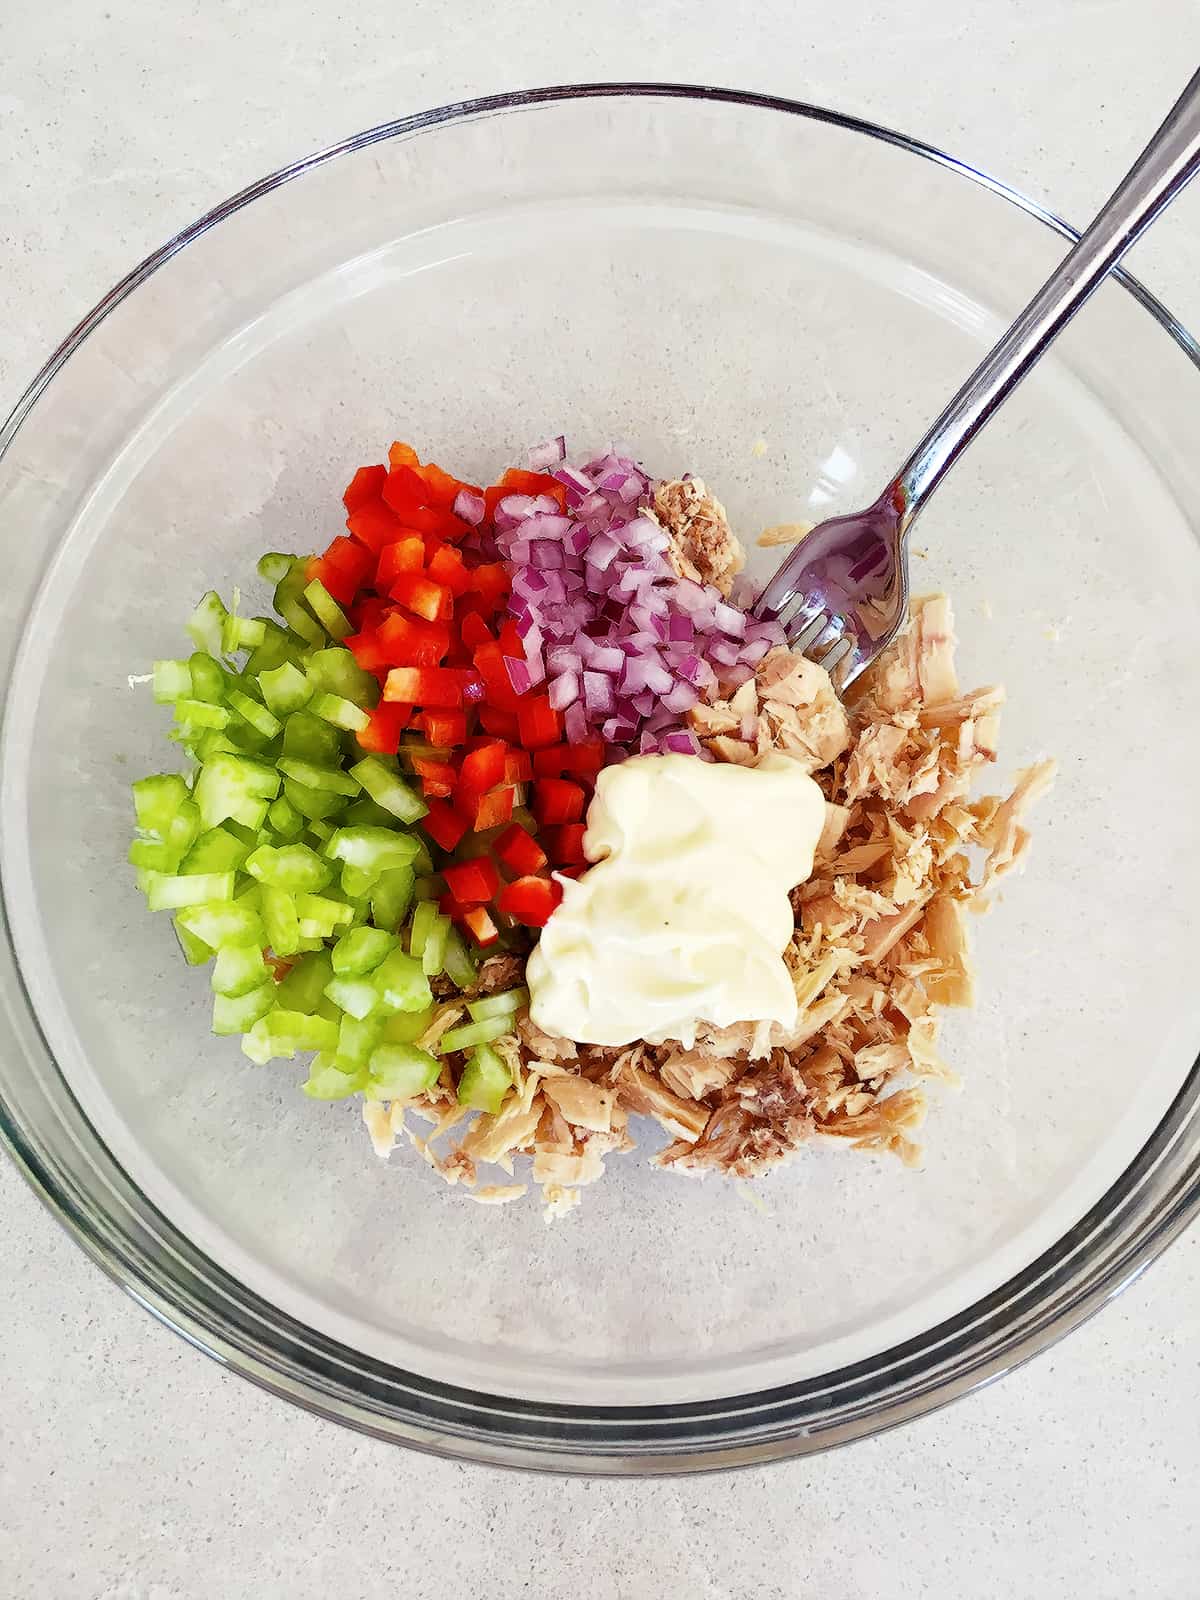 Chopped veggies with mayonnaise and tuna in a glass mixing bowl.